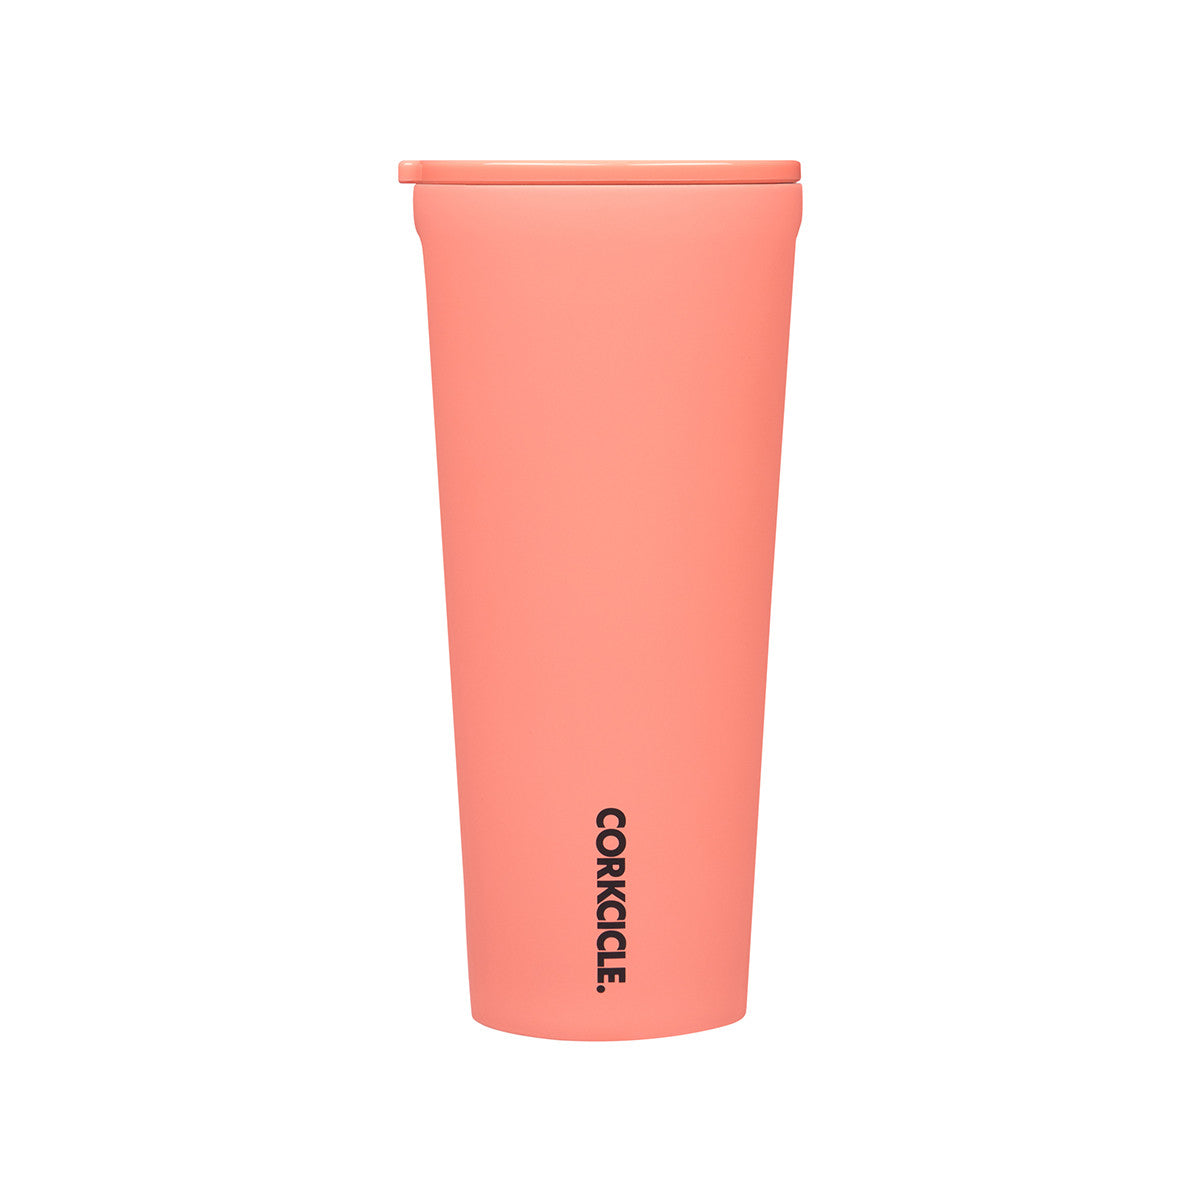 Corkcicle Insulated Tumbler Neon Light Coral Made of Fridays